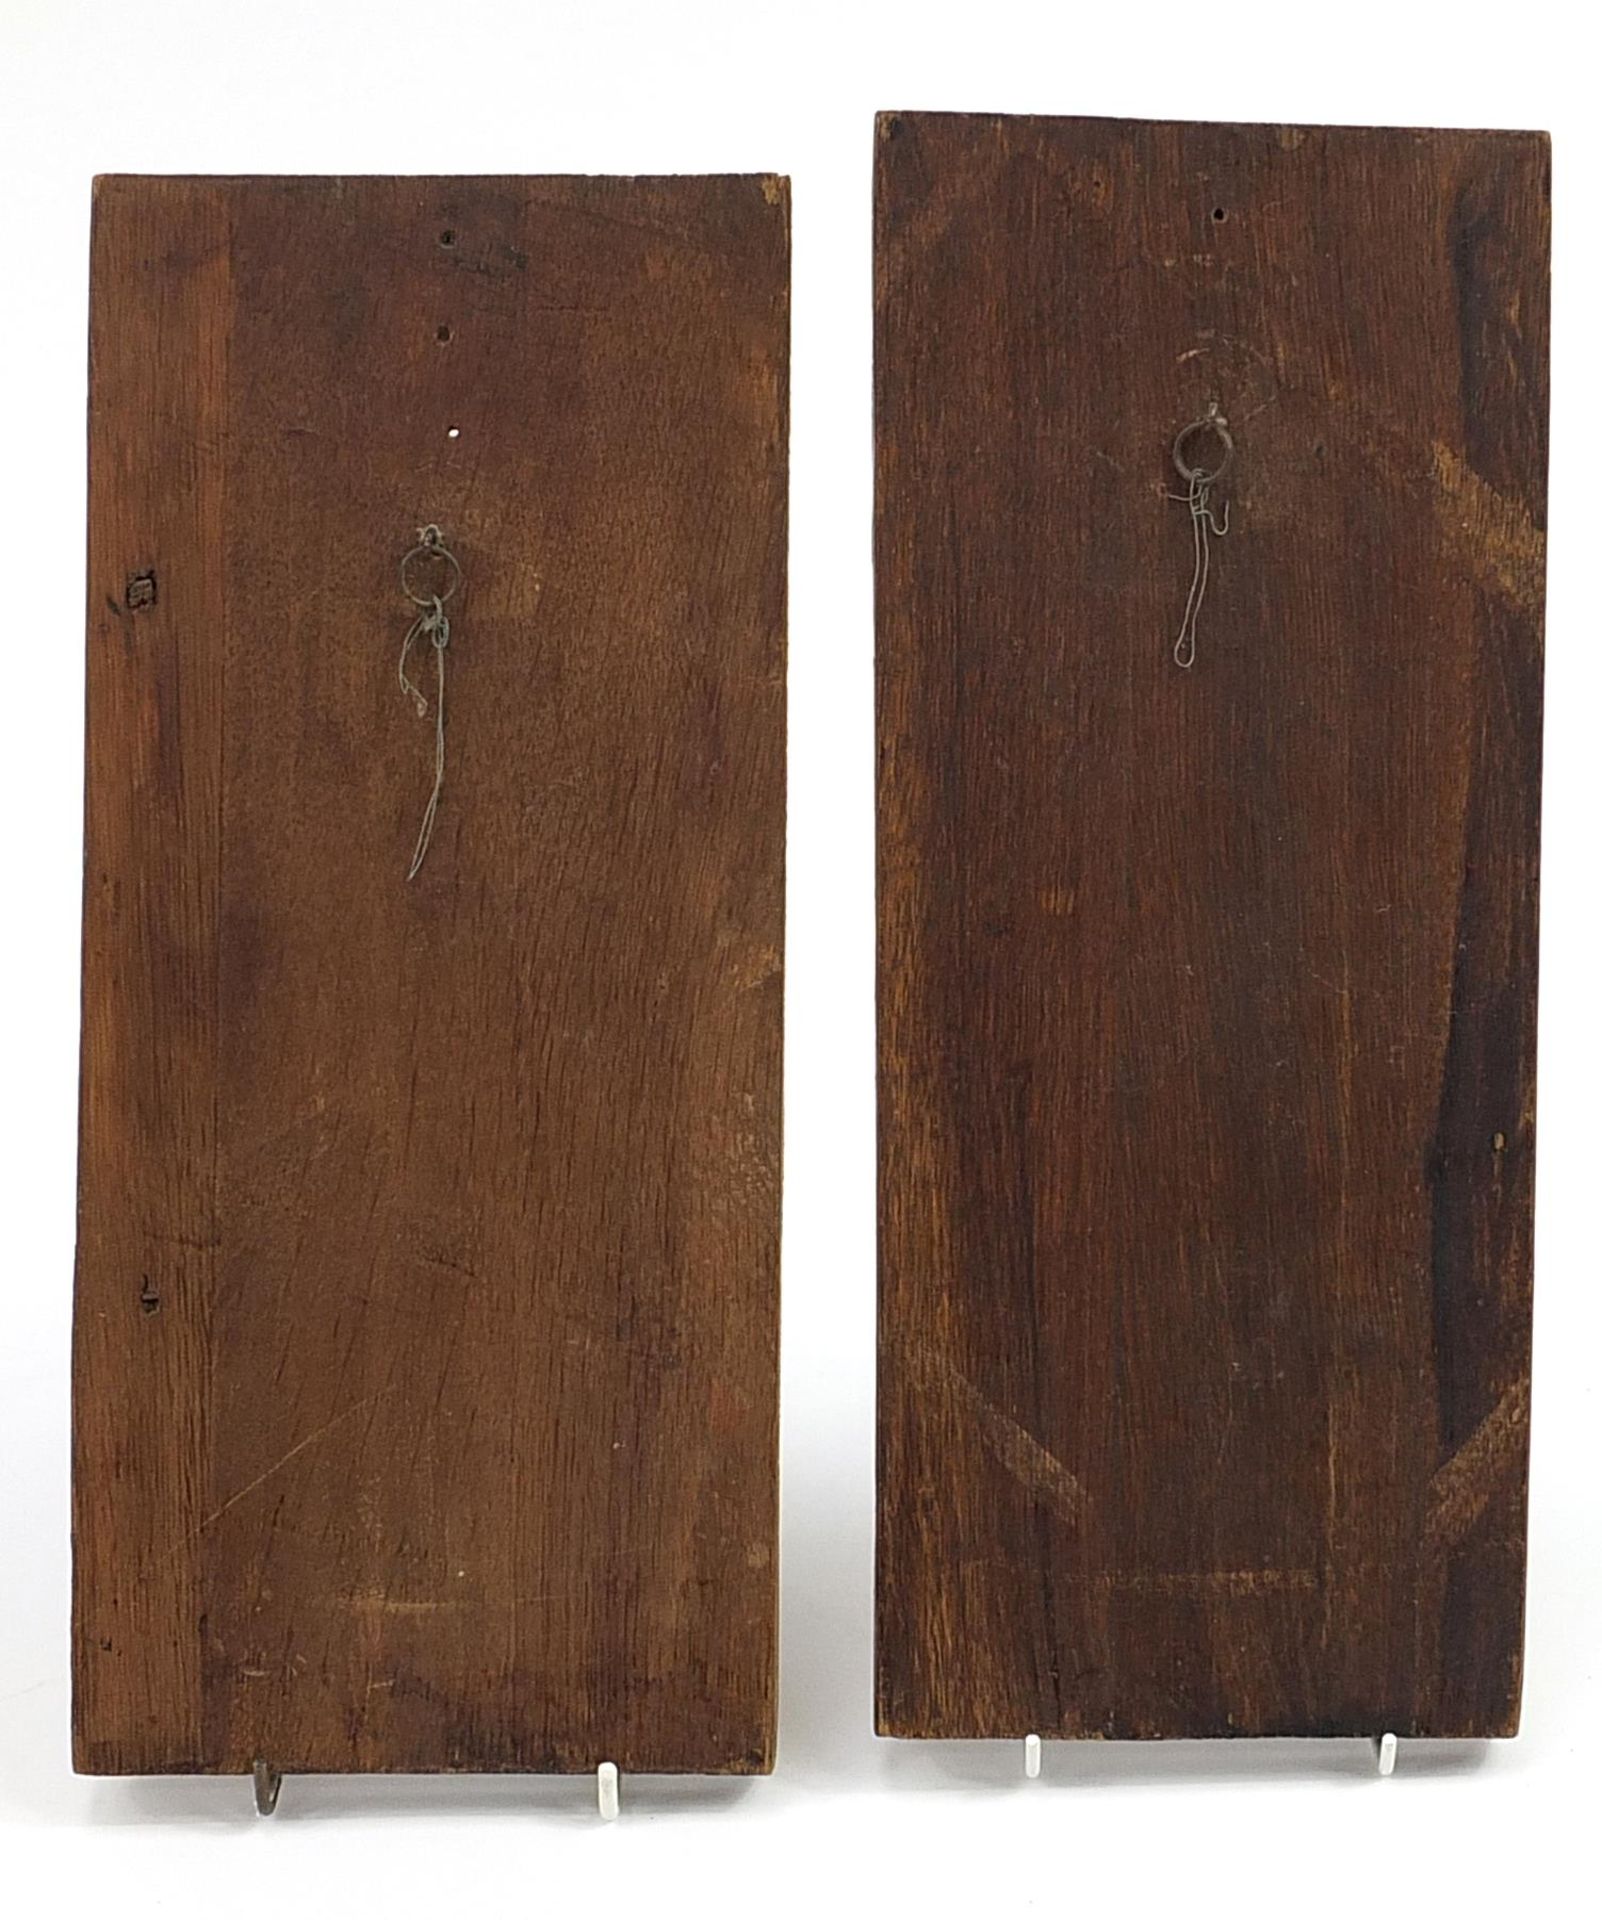 Two rectangular wooden moulds carved with figures in Elizabethan dress, each 38cm x 15.5cm - Image 2 of 2